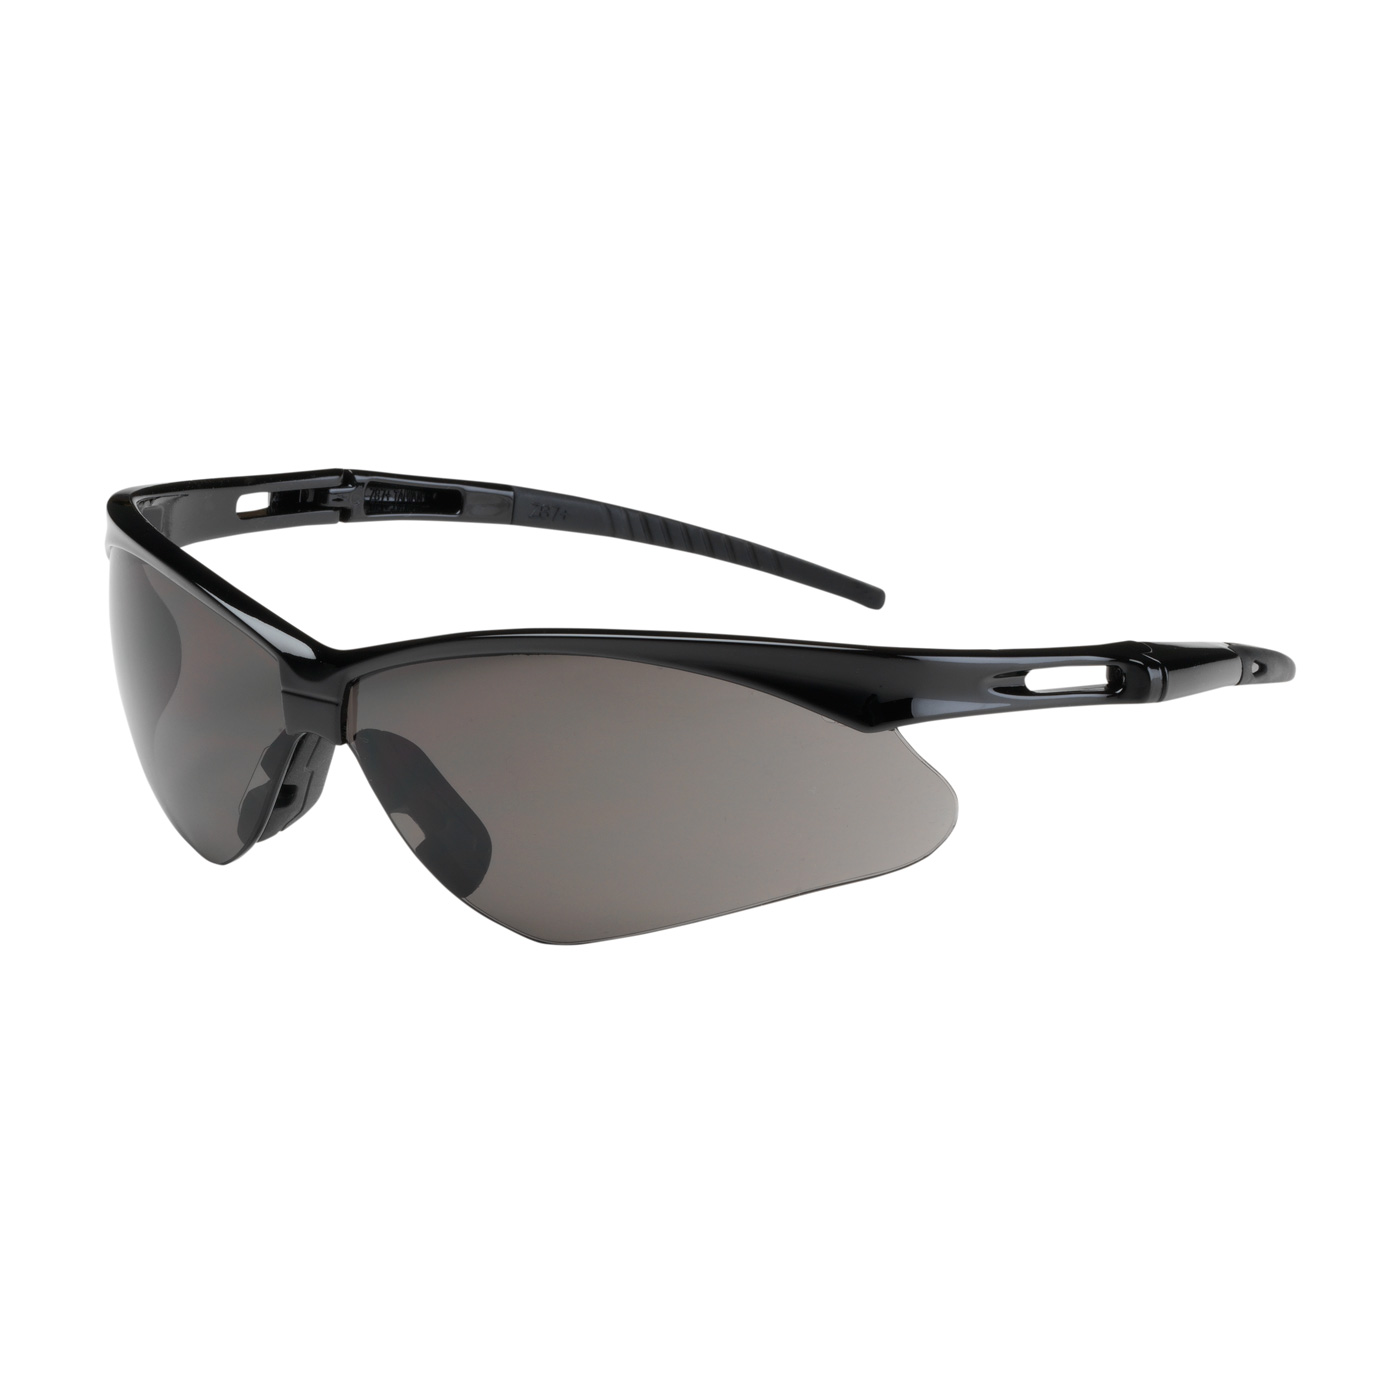 PIP 250-AN-10112 Anser Semi-Rimless Safety Glasses with Black Frame, Gray Lens and Anti-Scratch Coating PID-250 AN 10112